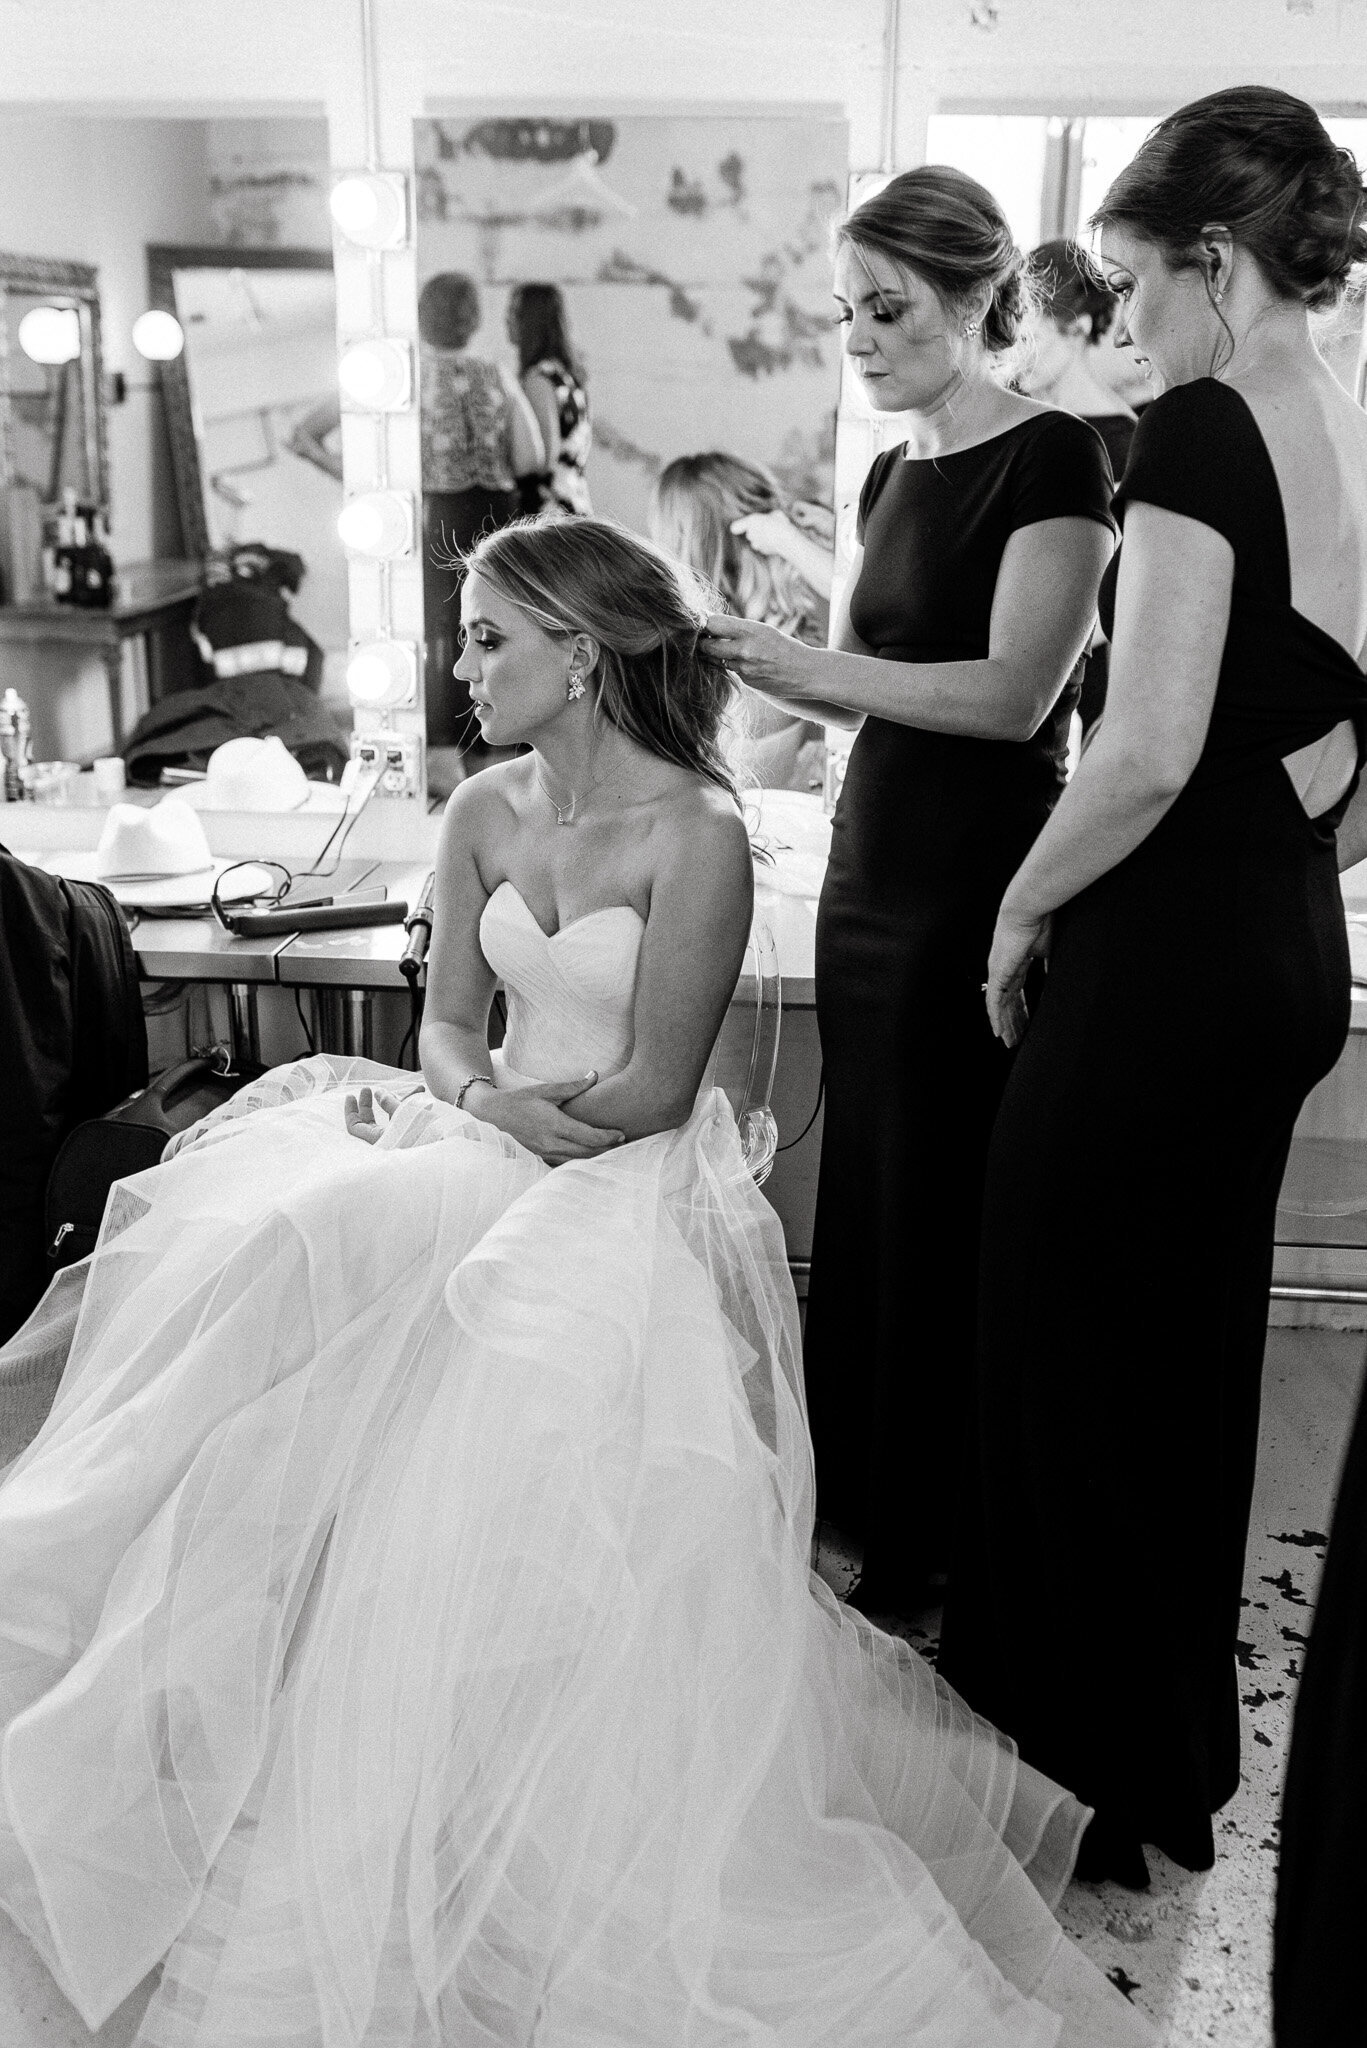 black and white photo of bride getting her hair done by bridesmaid.